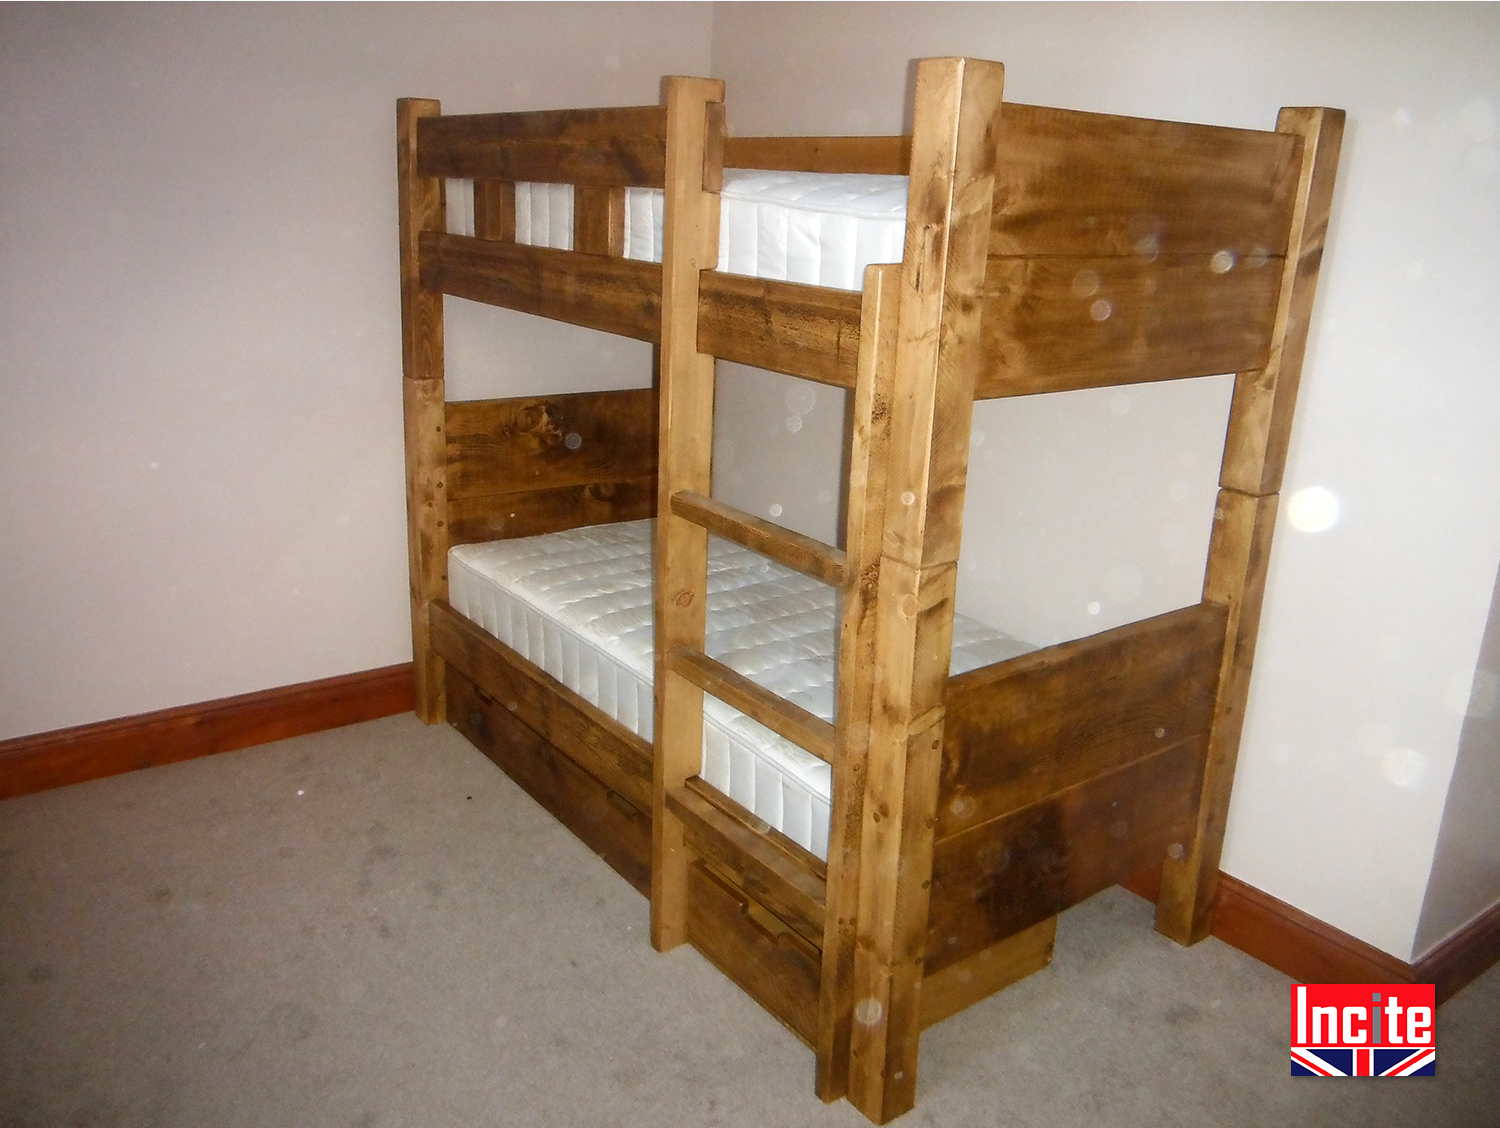 Wooden Plank Bunk Beds Handmade By, Old Fashioned Bunk Beds